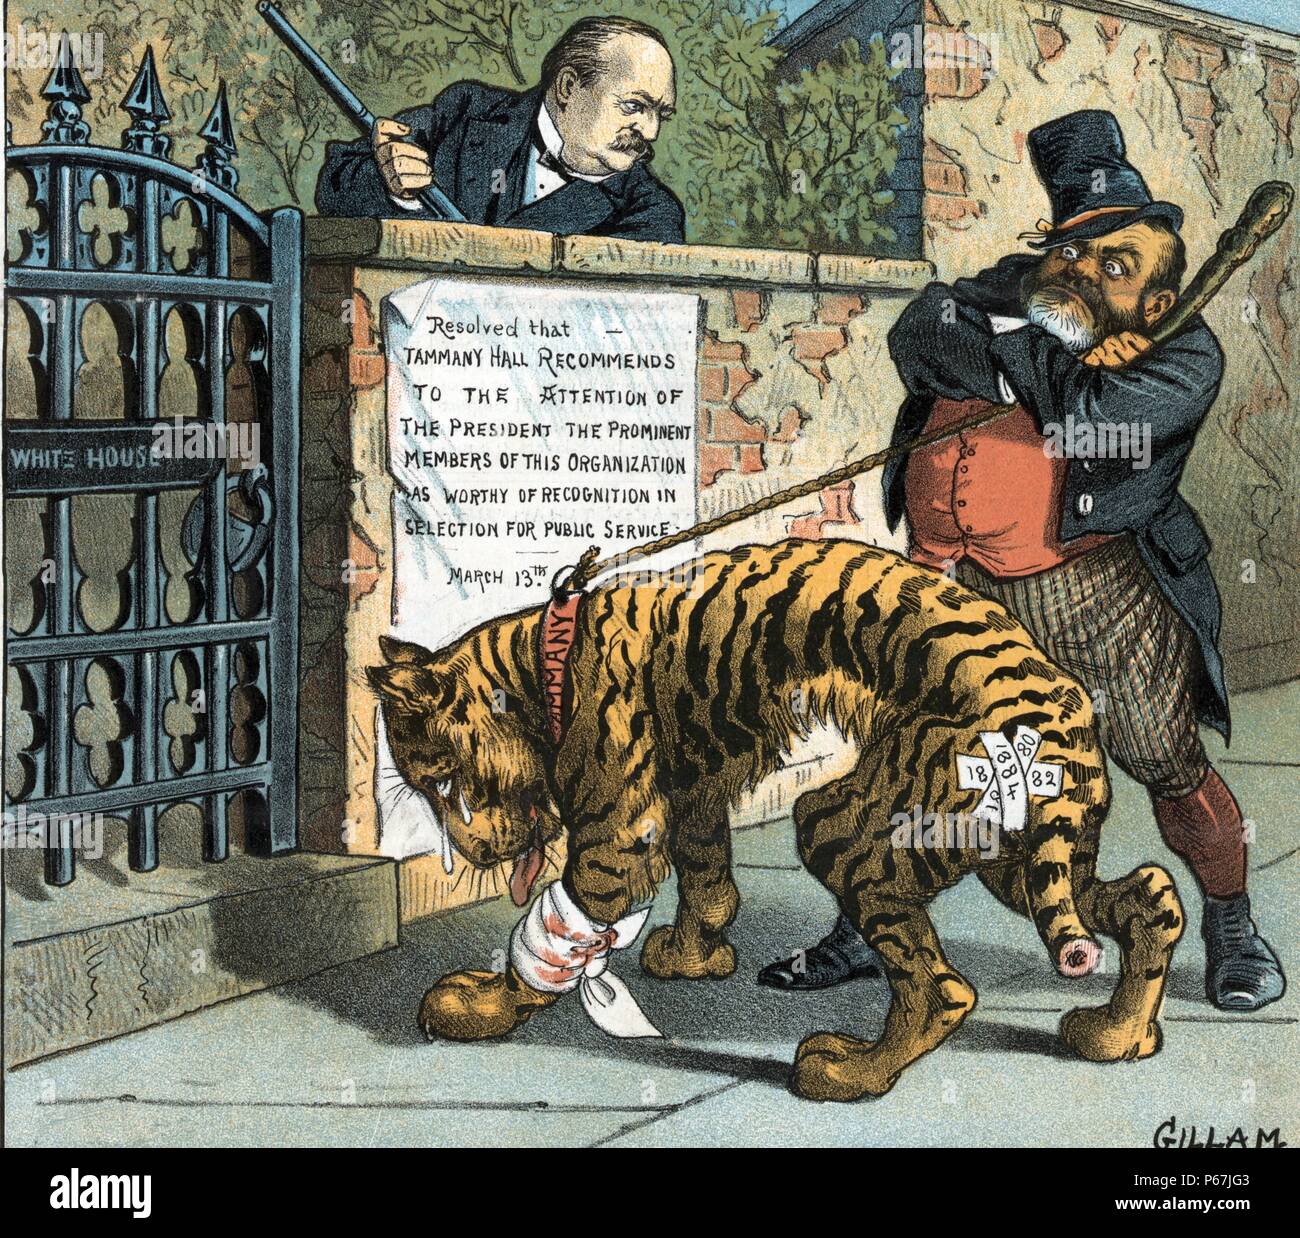 The issue' John Kelly holding a shillelagh in one hand and a rope tied to an injured tiger labelled 'Tammany' with bandages labelled '1880, 1882, [and] 1884' in the other, standing outside the 'White House' gate and Grover Cleveland holding a rifle, standing on the other side of the wall. Stock Photo